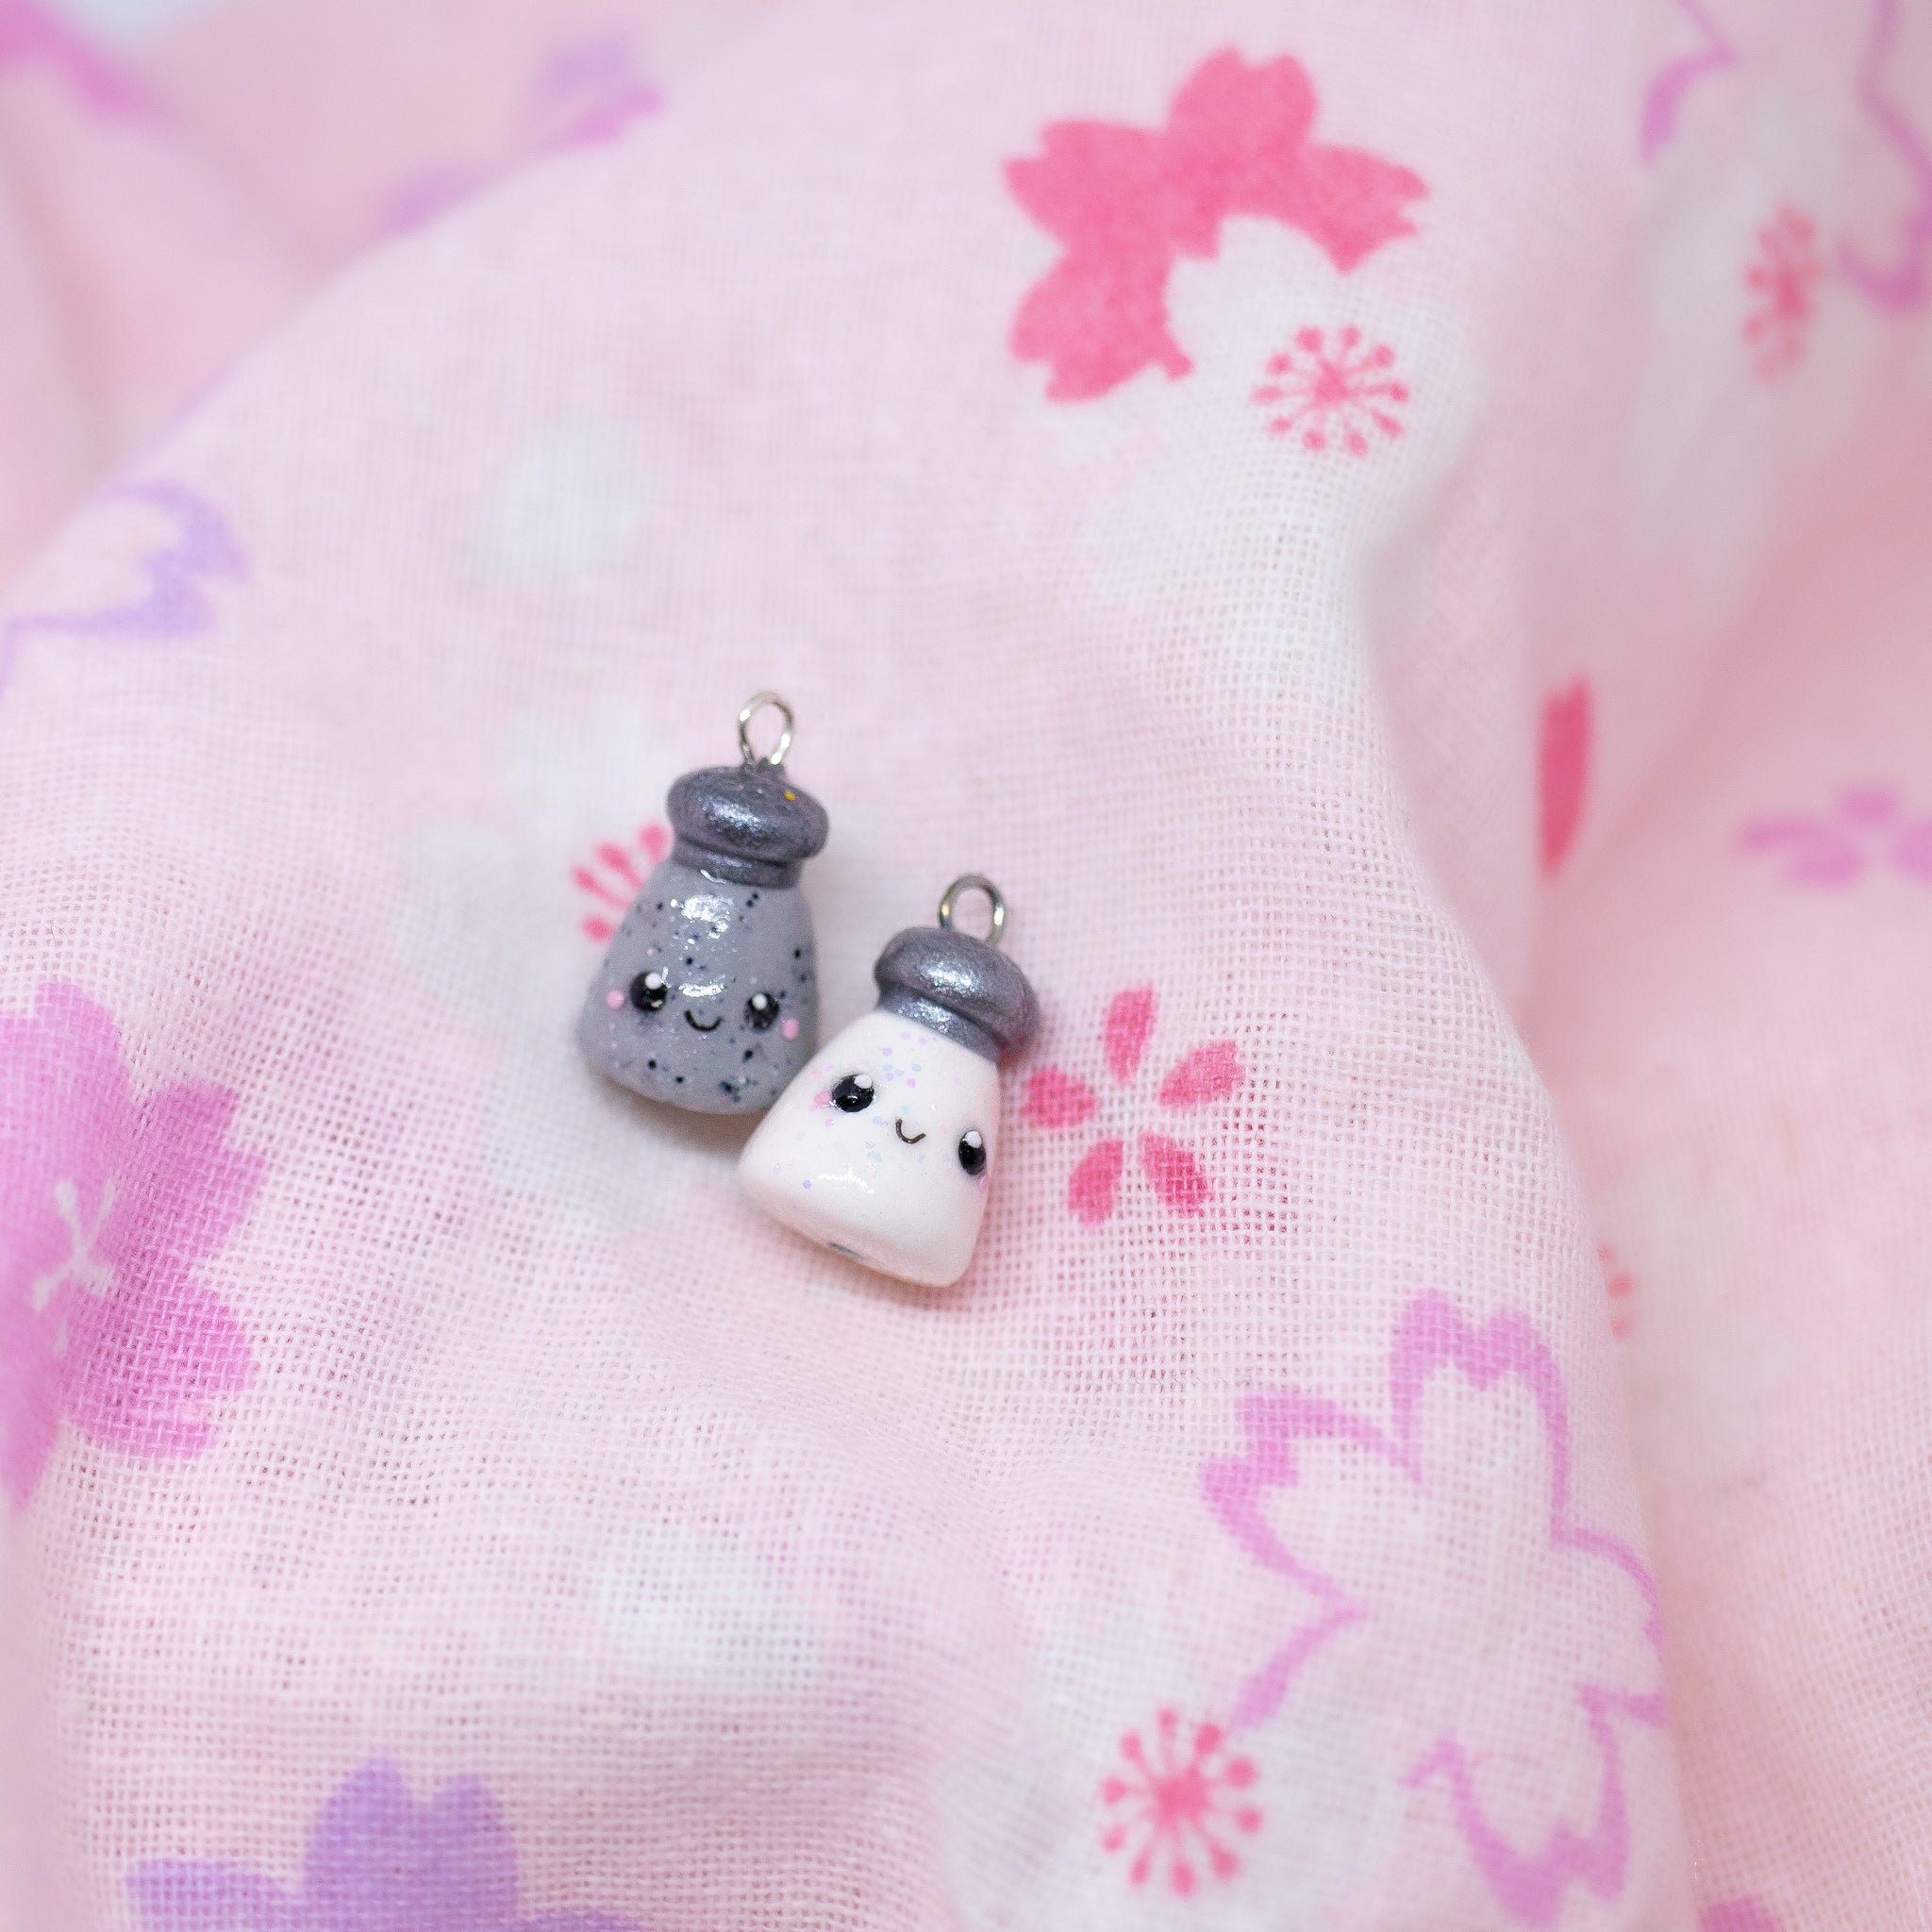 SALT and PEPPER SHAKERS Best Friends Pendant. Kawaii Besties on Necklace  Book Mark Key Ring Polymer Clay 